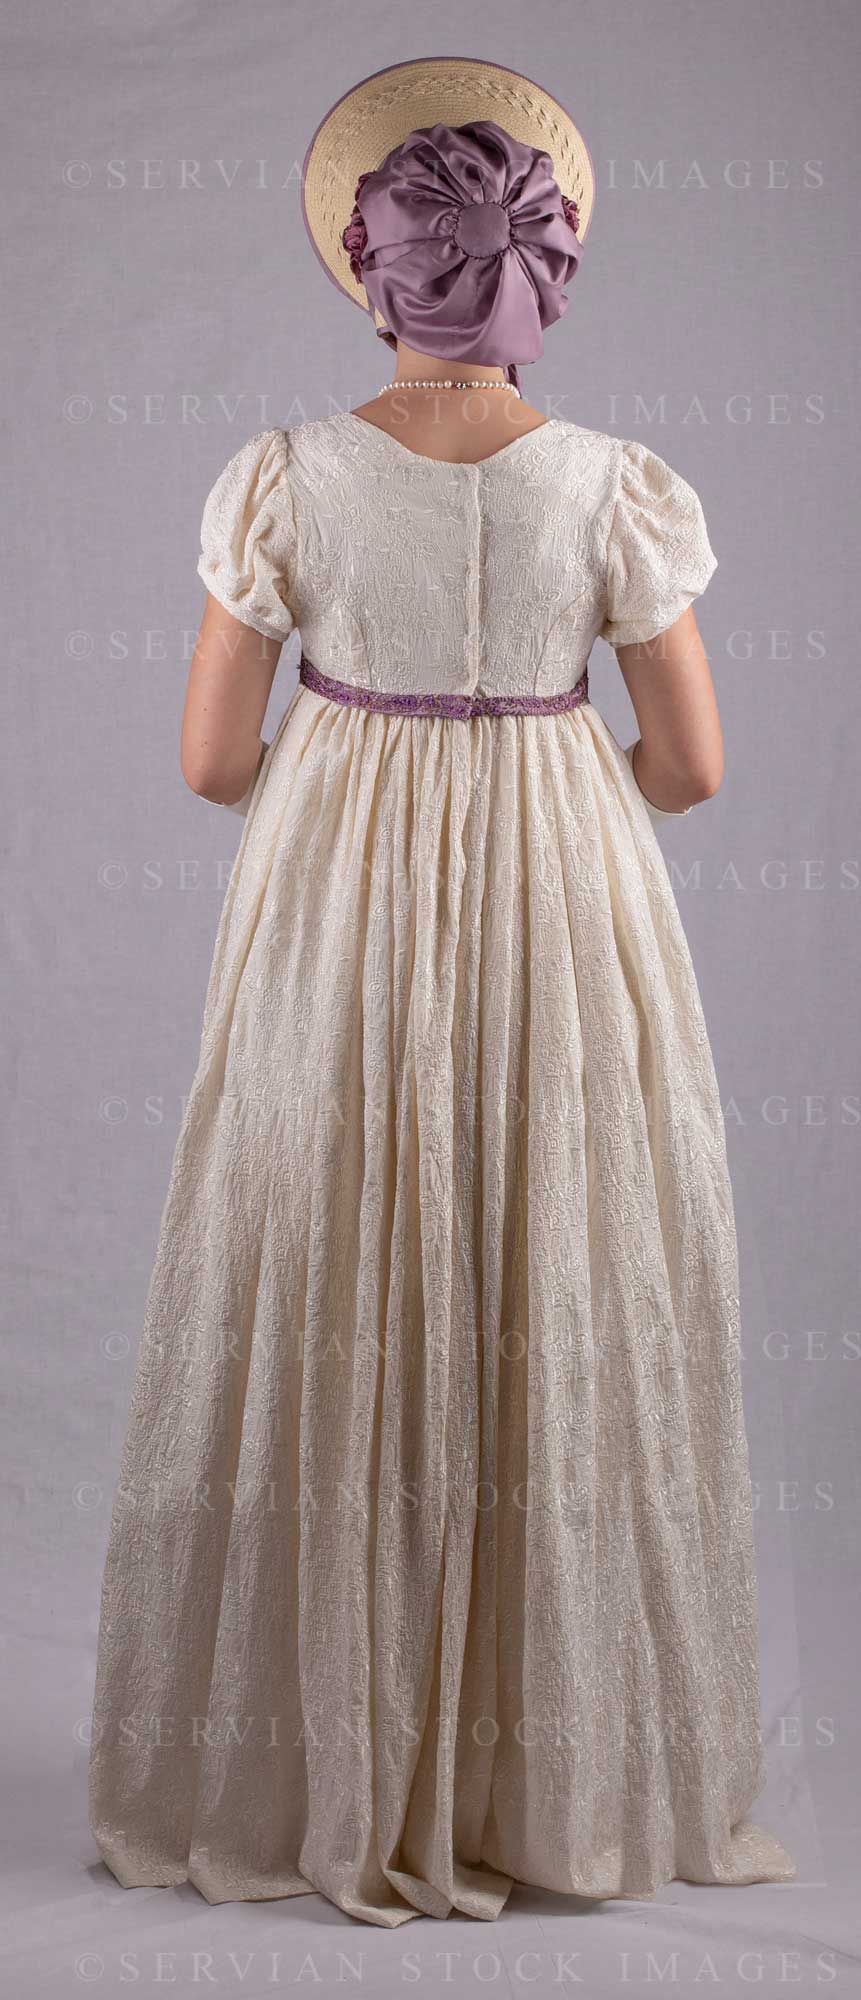 Regency woman in a cream embroidered dress and long gloves (Skye 0039)